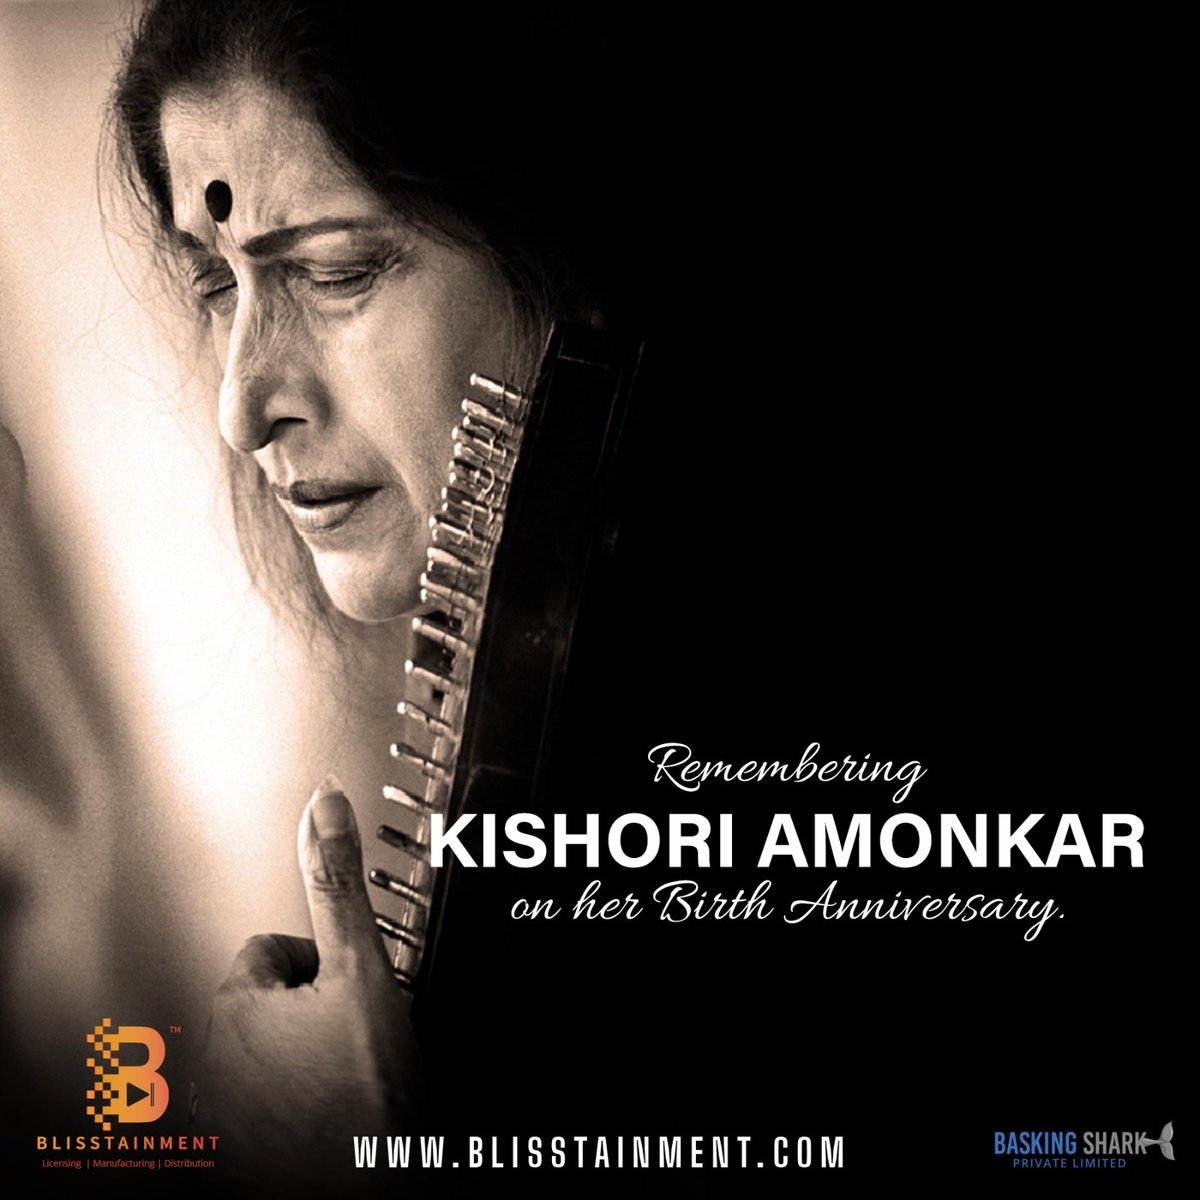 Remembering the Queen of Indian classical music, Kishori Amonkar, on her birth anniversary. May her legacy live on forever. 
.
#blisstainment #KishoriAmonkar #ClassicalMusic #IndianMusic #MusicLegend #BirthAnniversary #RememberingKishoriAmonkar #MusicInspiration #MusicDevotion